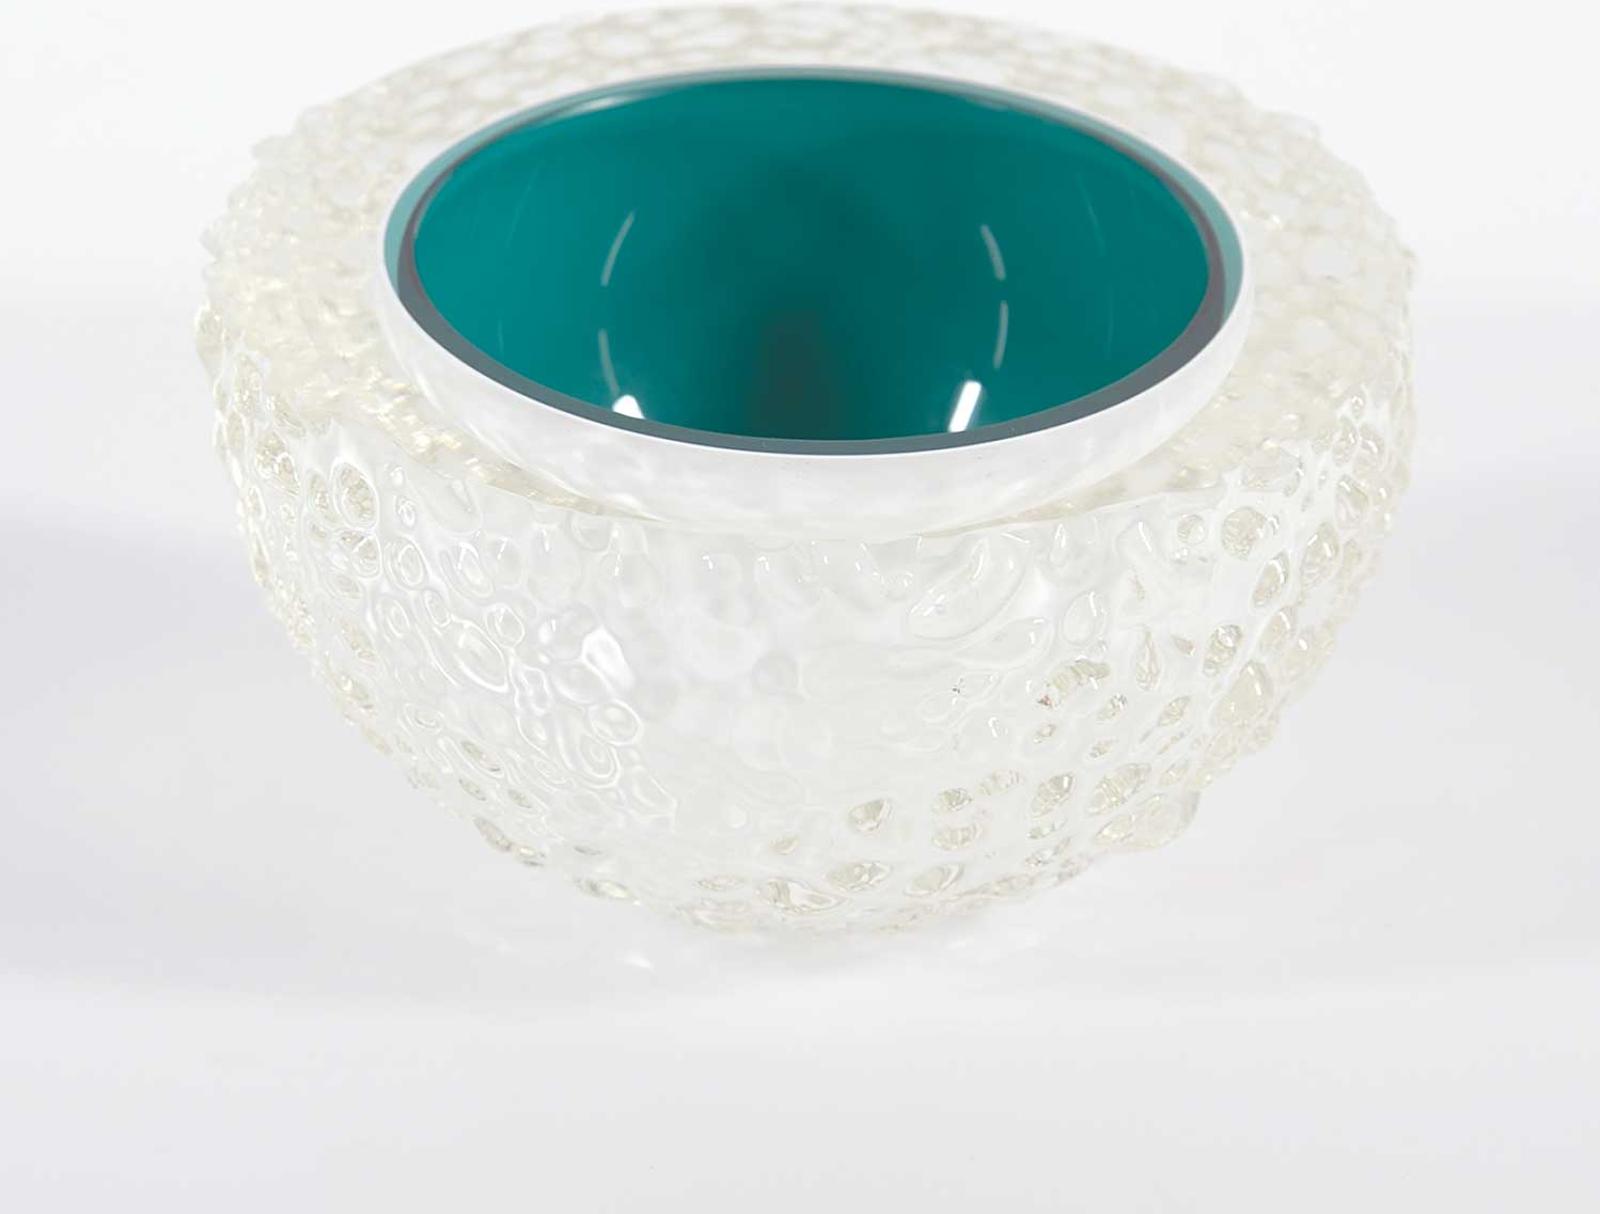 Molly Stone (1949) - Turquoise Bowl with Textured Glass Exterior